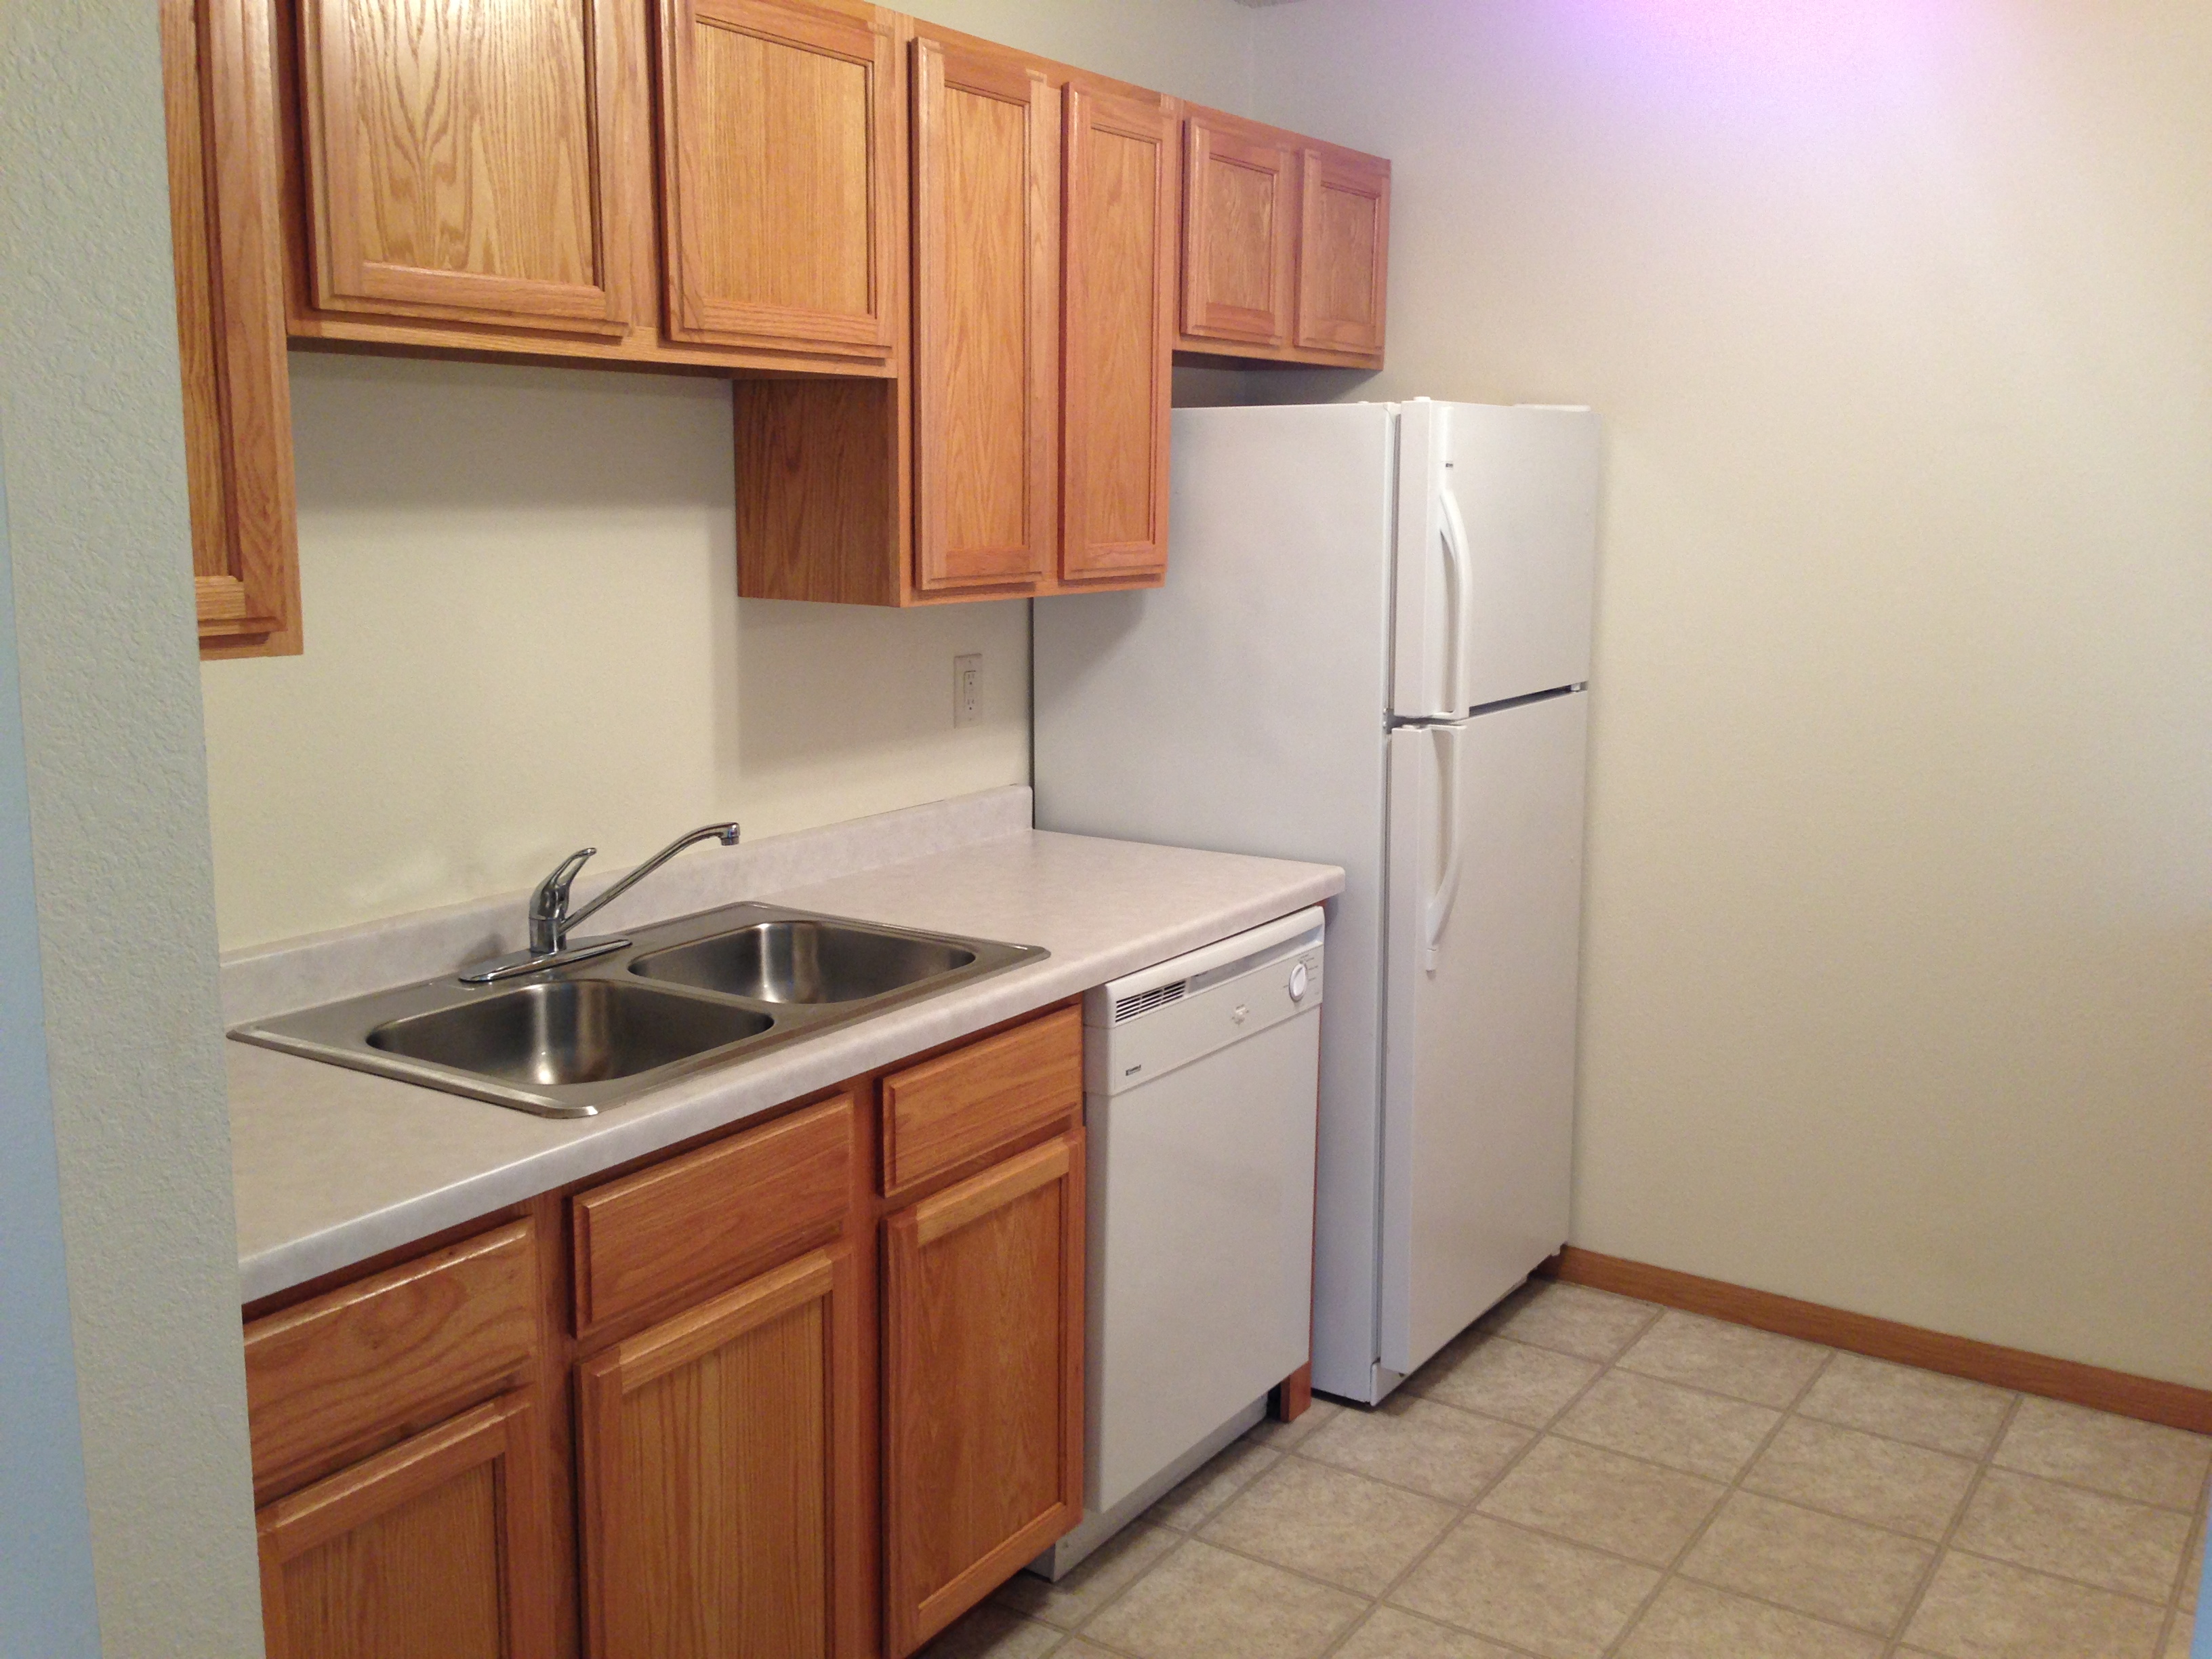 Fully Equipped Kitchen at Hillcrest Apartments, St Cloud, 56301